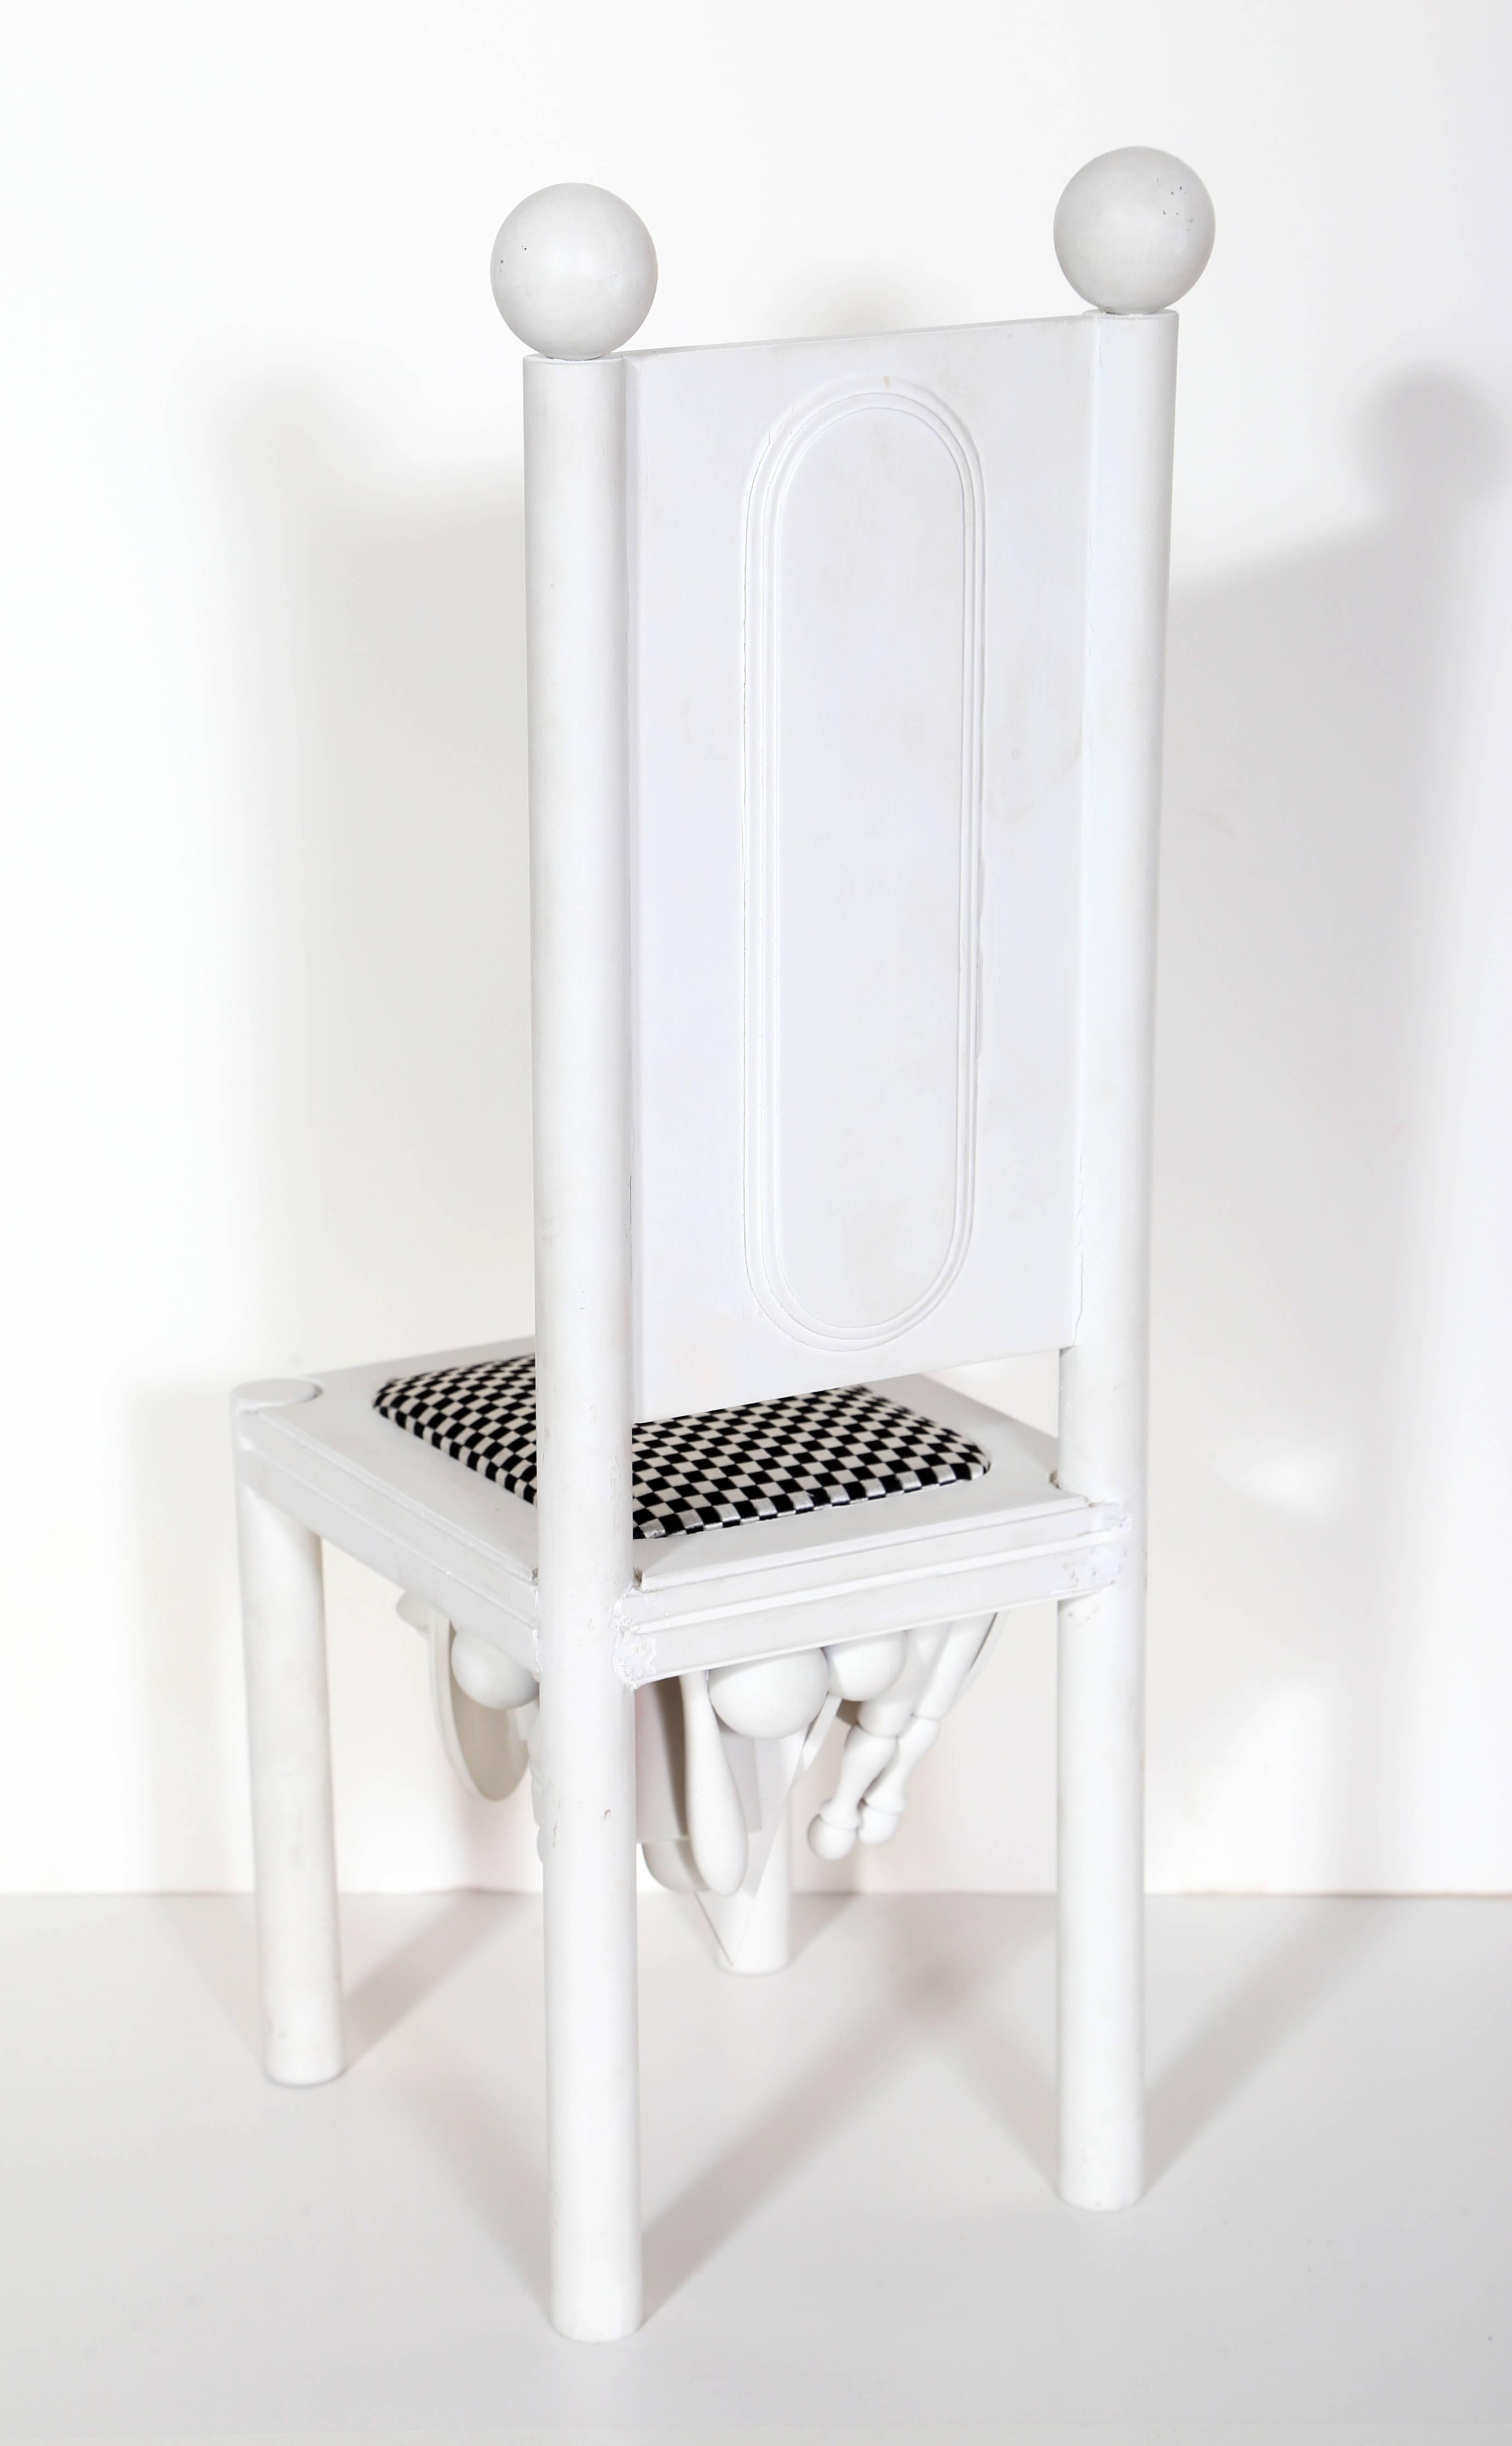 Chair, Modernist Tabletop Sculpture by Lucio Del Pezzo For Sale 3